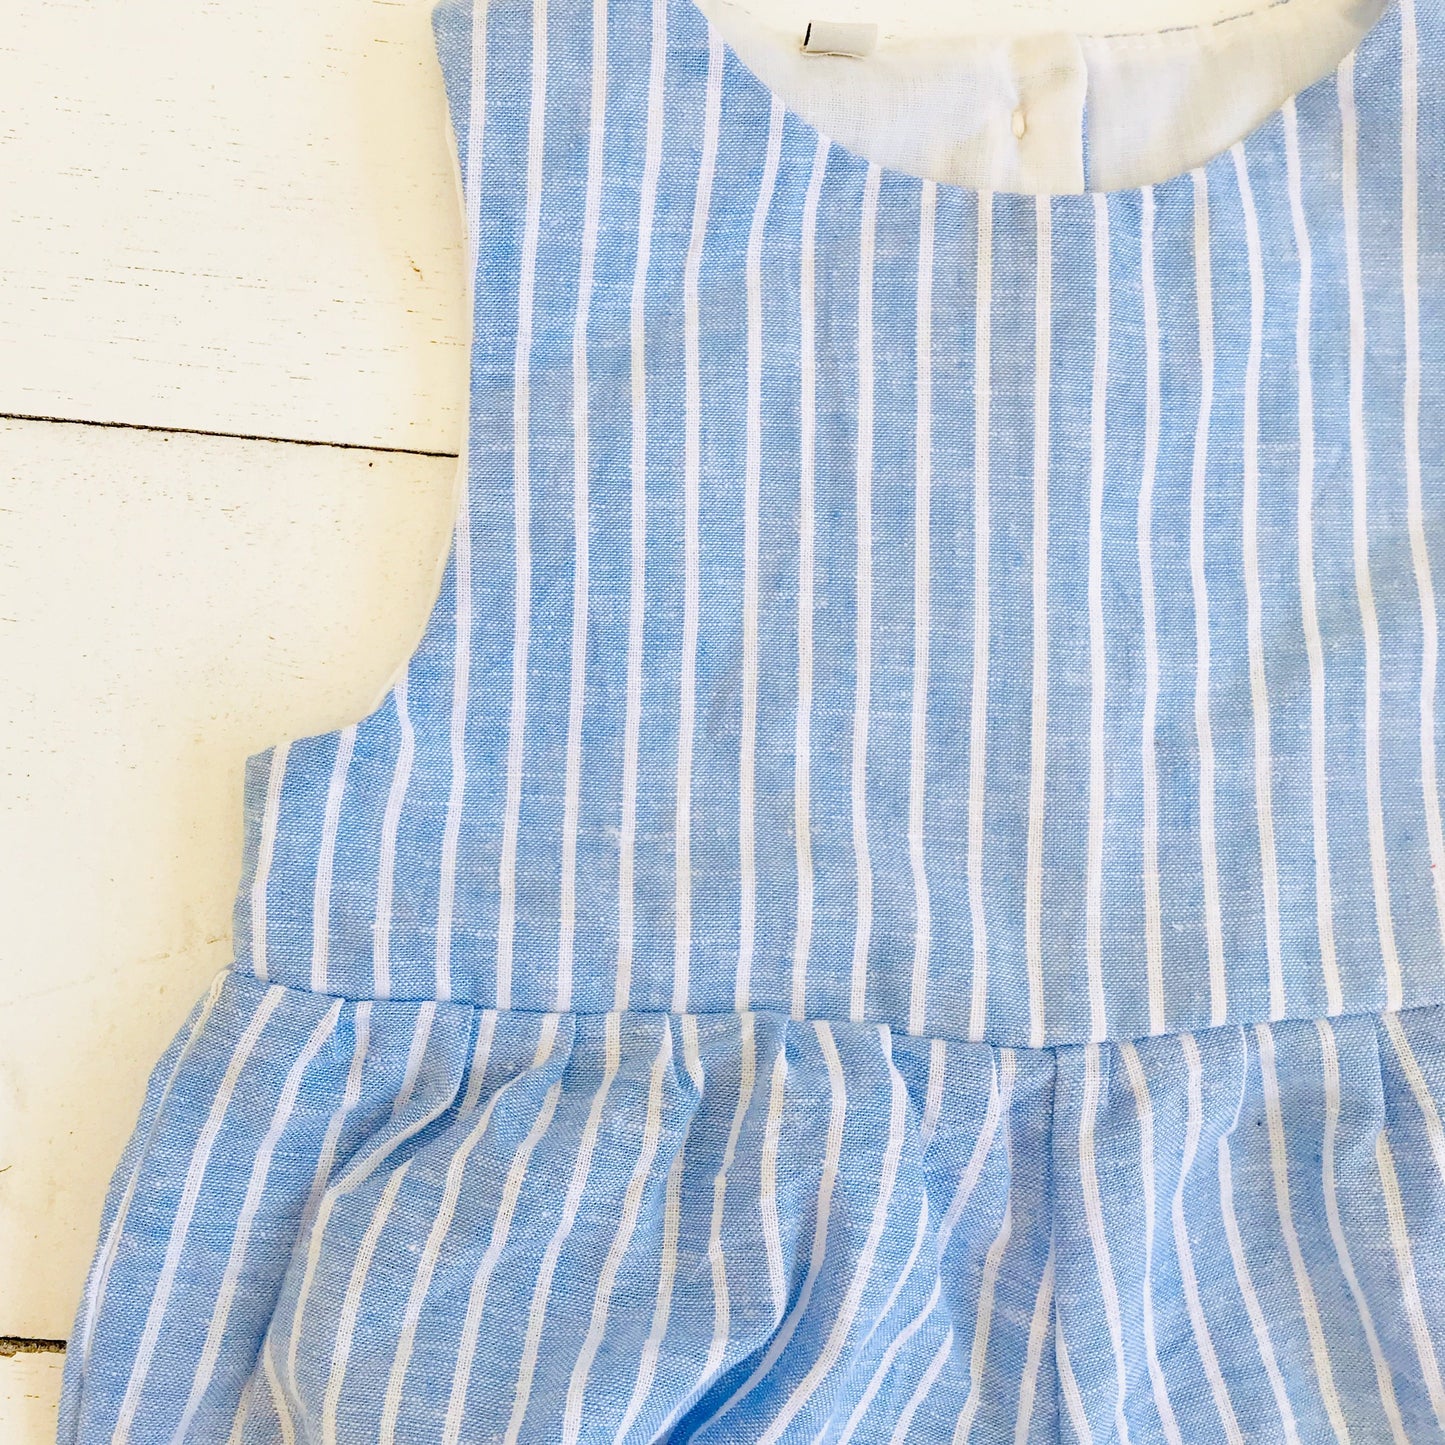 Orchid Playsuit in Blue Bell Stripes Linen - Lil' Tati